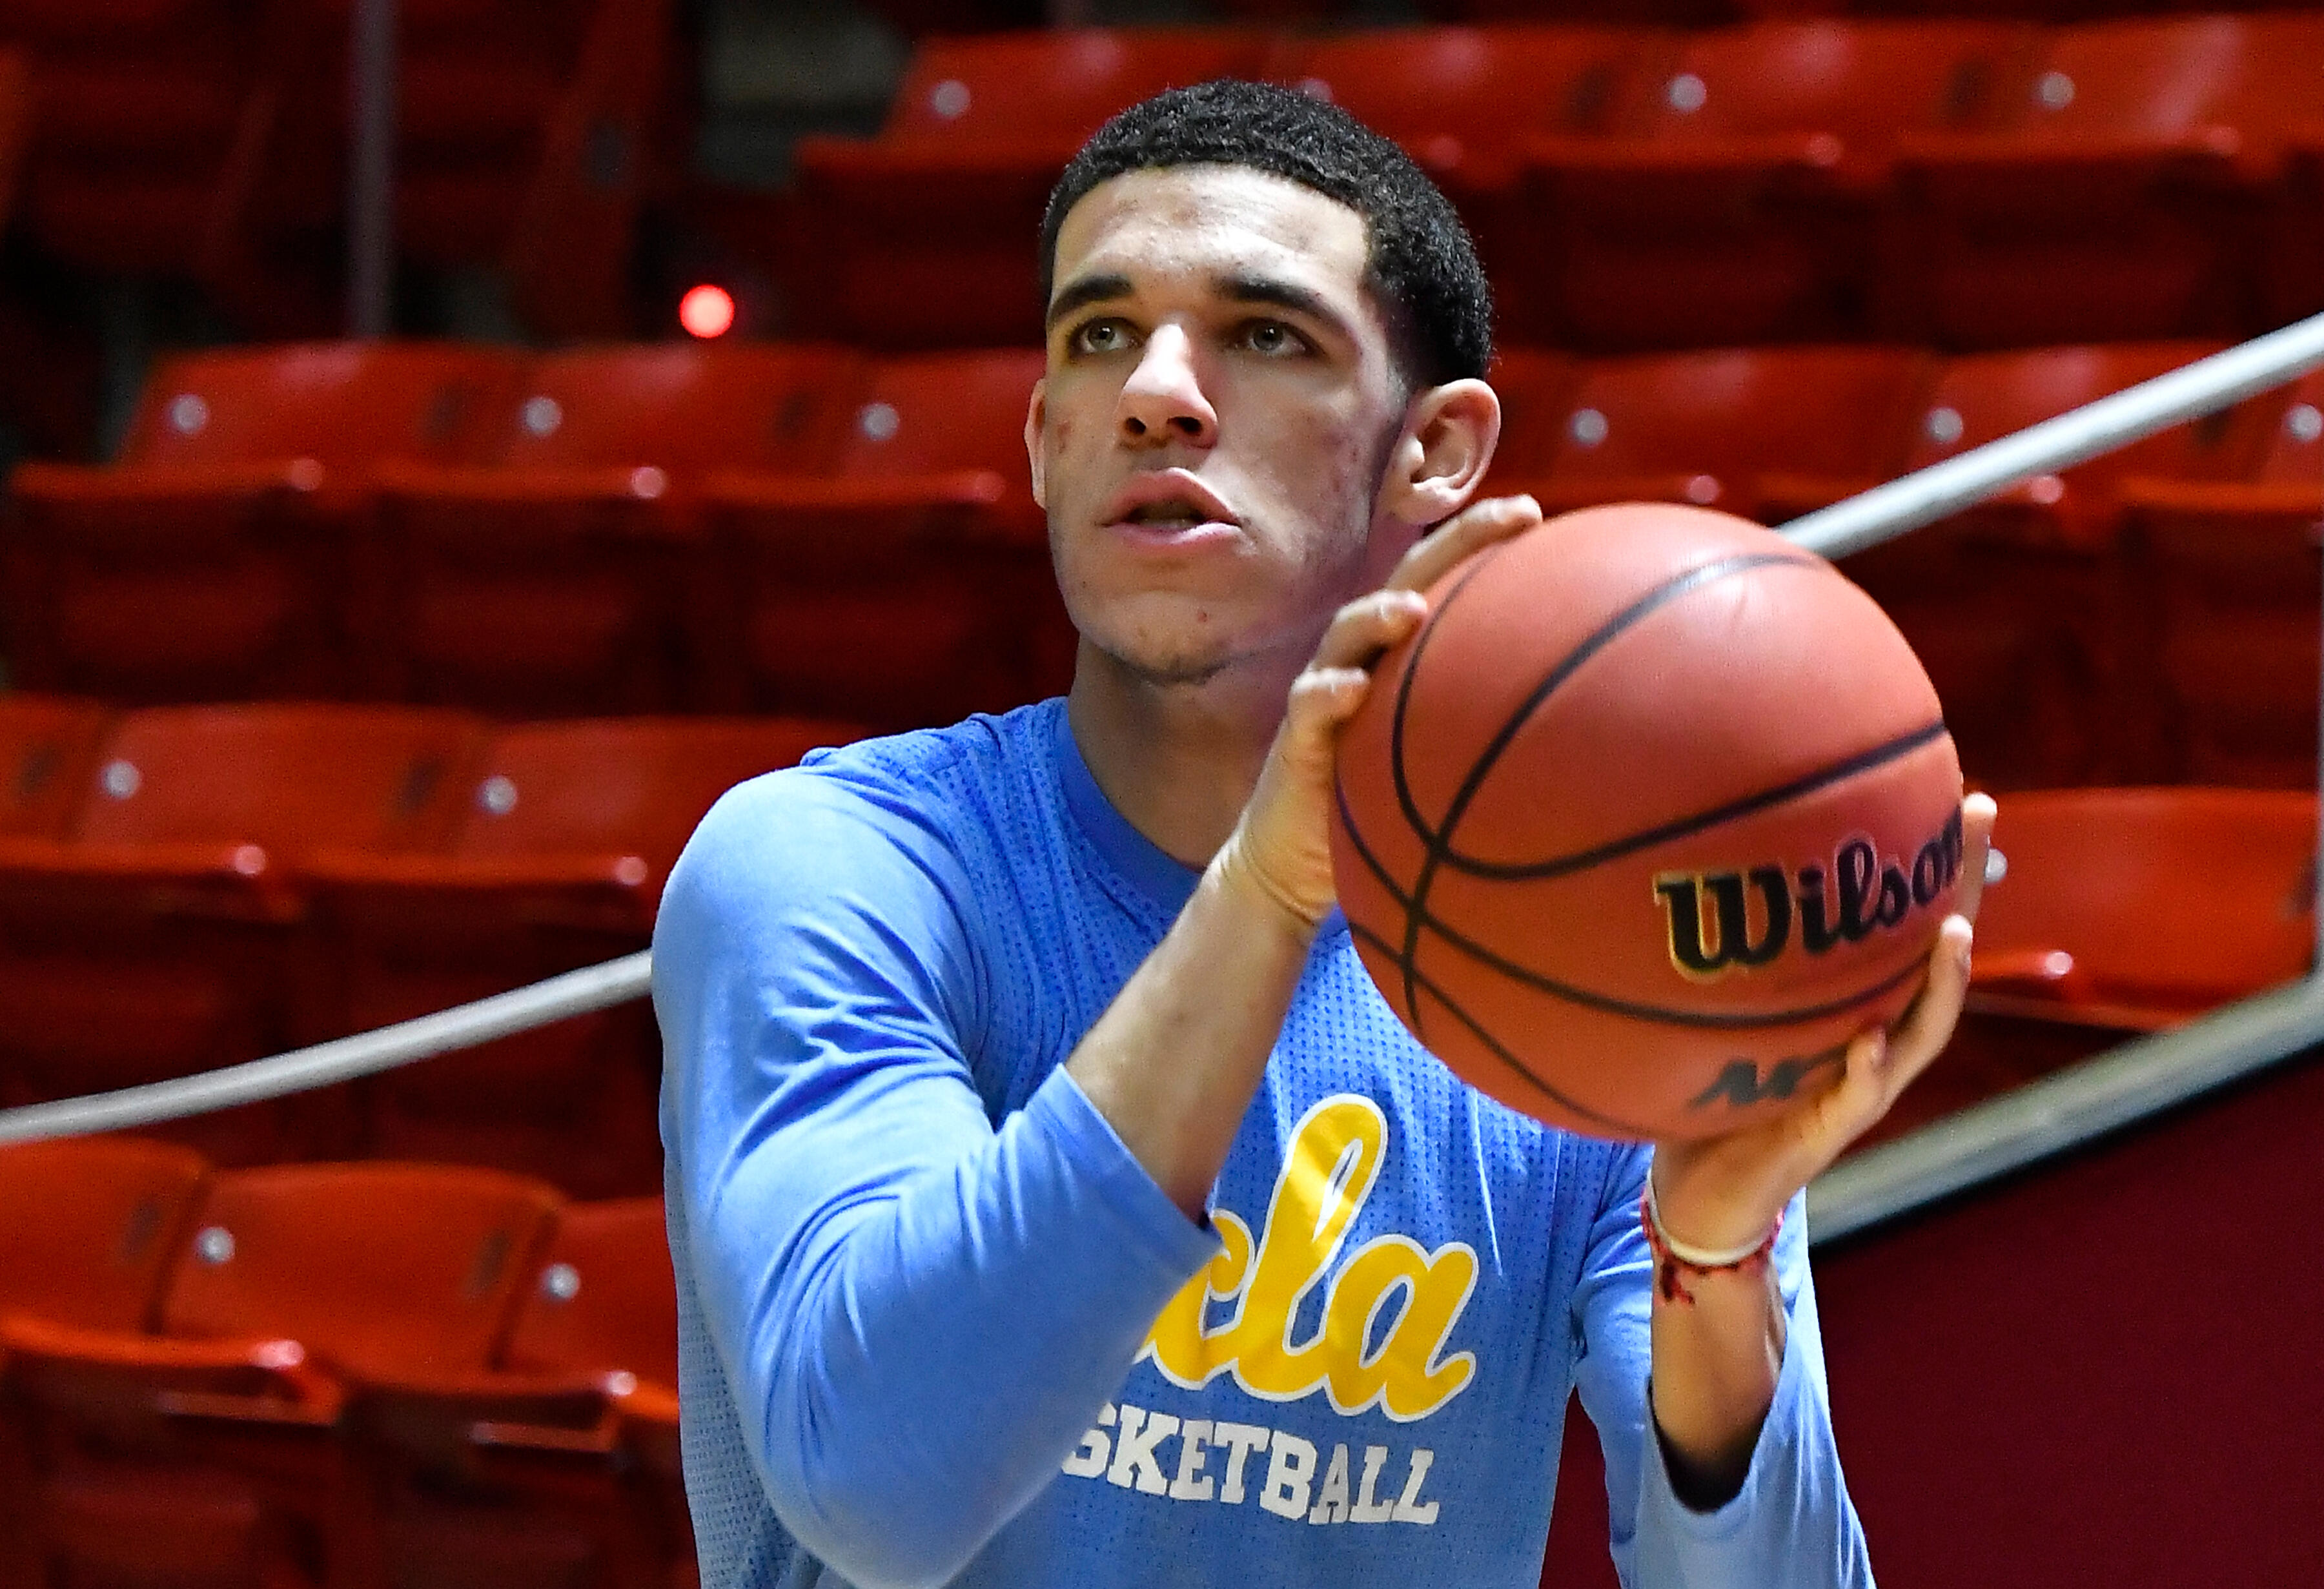 SALT LAKE CITY, UT - JANUARY 14: Lonzo Ball #2 of the UCLA Bruins practices his shooting before their game against the Utah Utes at the Jon M. Huntsman Center on January 14, 2017 in Salt Lake City, Utah. (Photo by Gene Sweeney Jr/Getty Images)